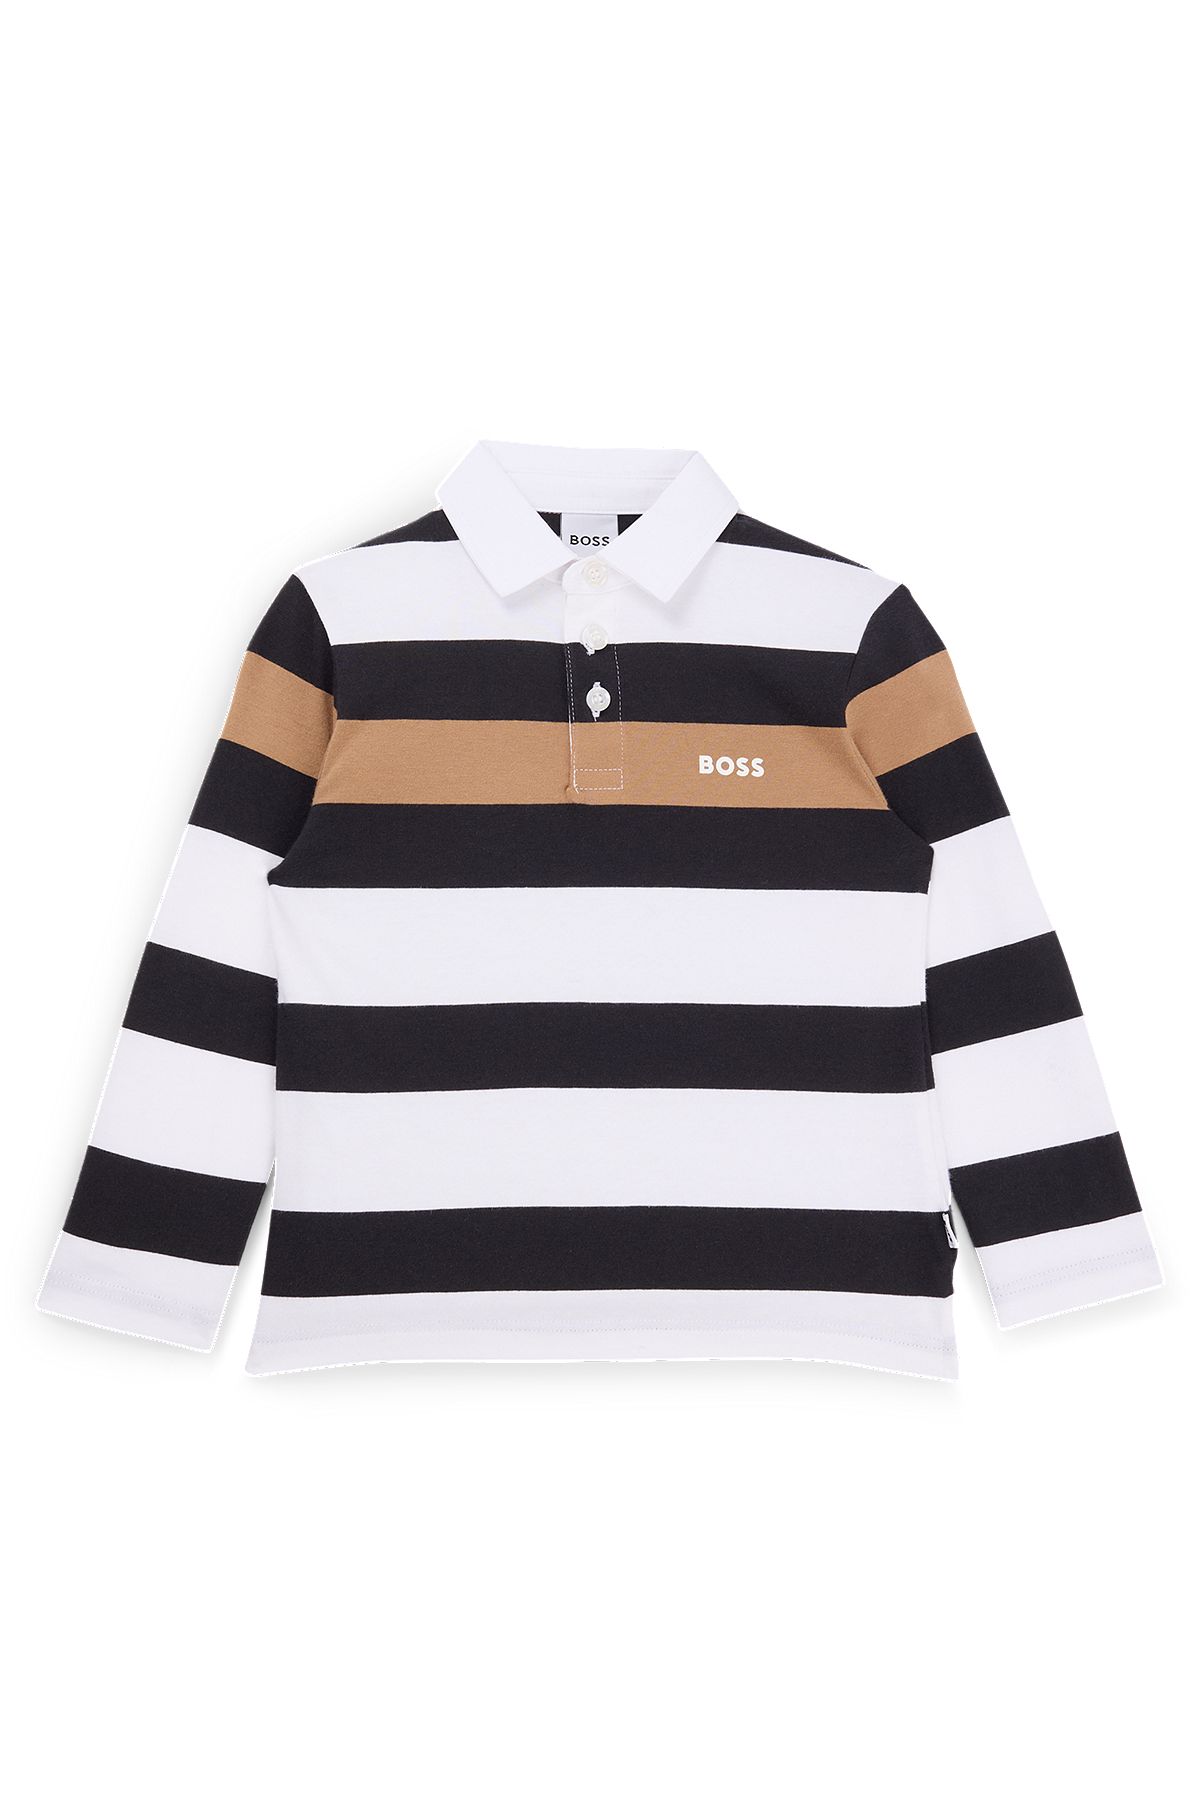 Kids' long-sleeved polo shirt in cotton with stripes, Black